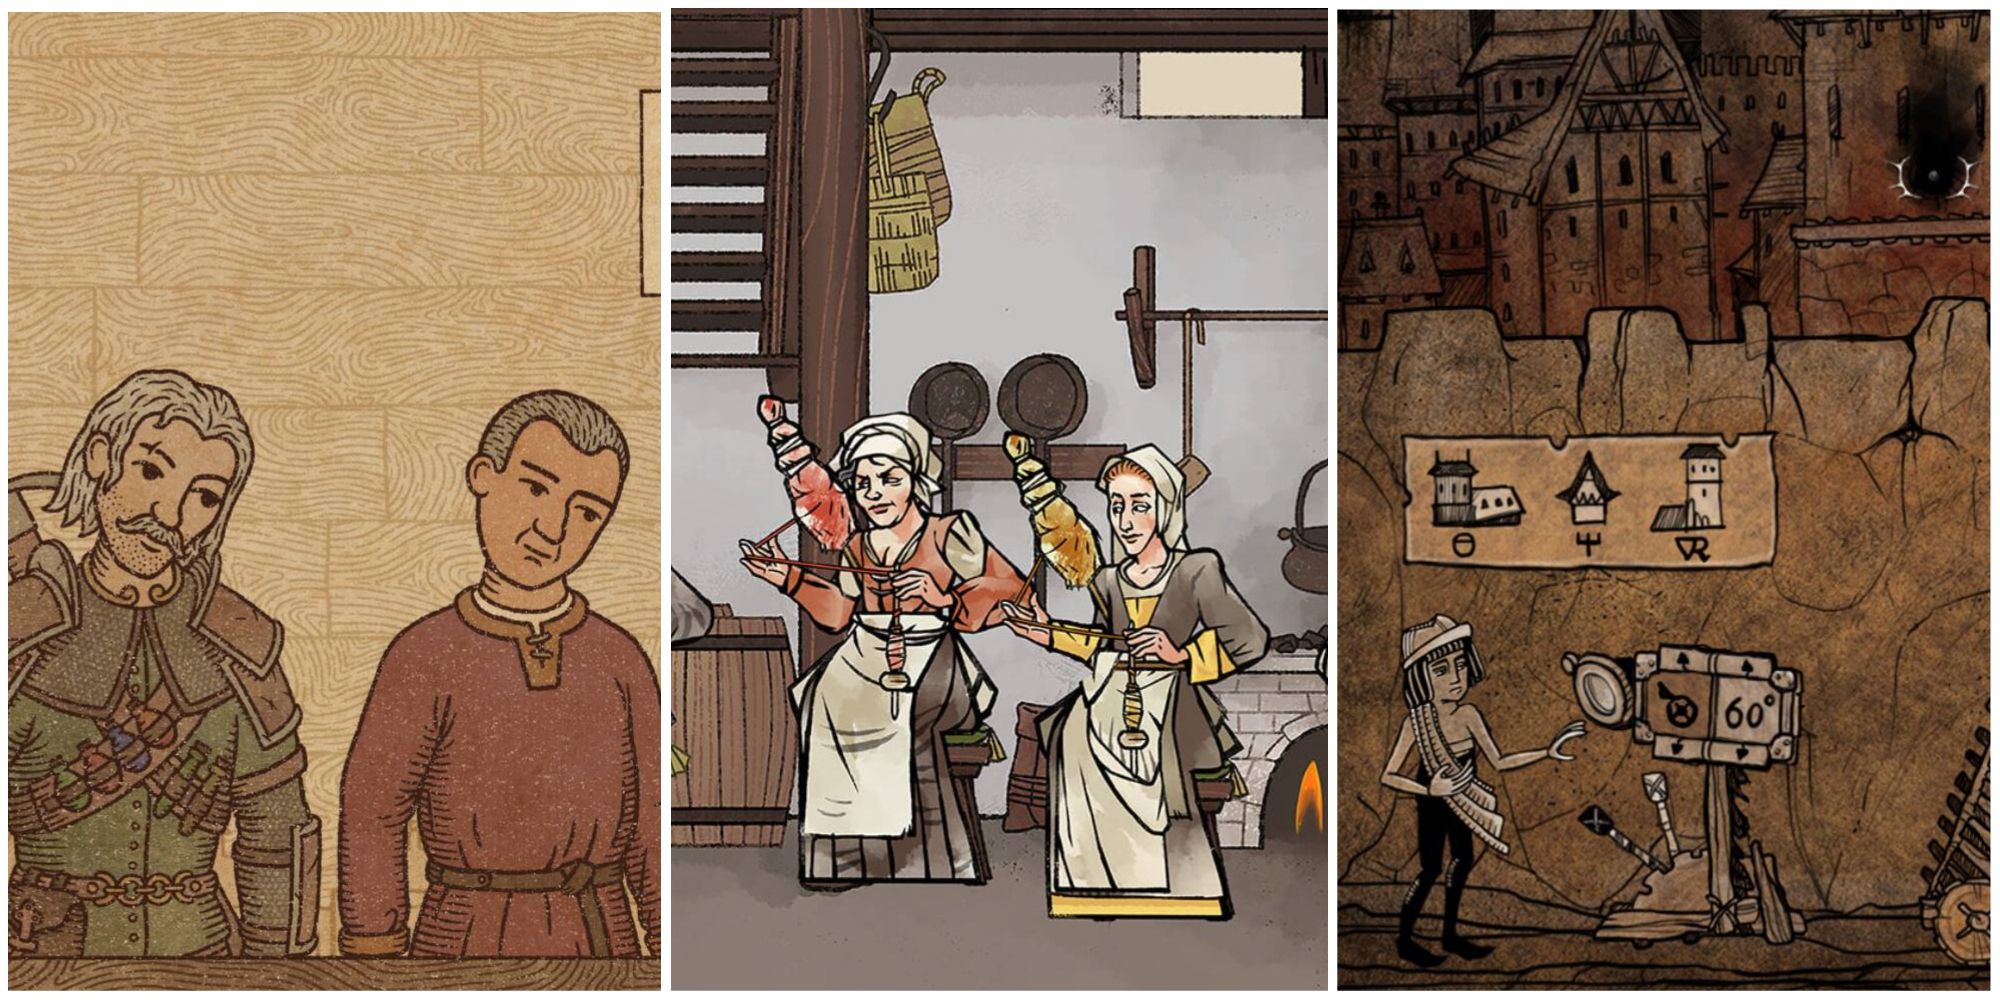 3 medieval games in one collage, including Potion Craft, Pentiment, and Apocalipsis